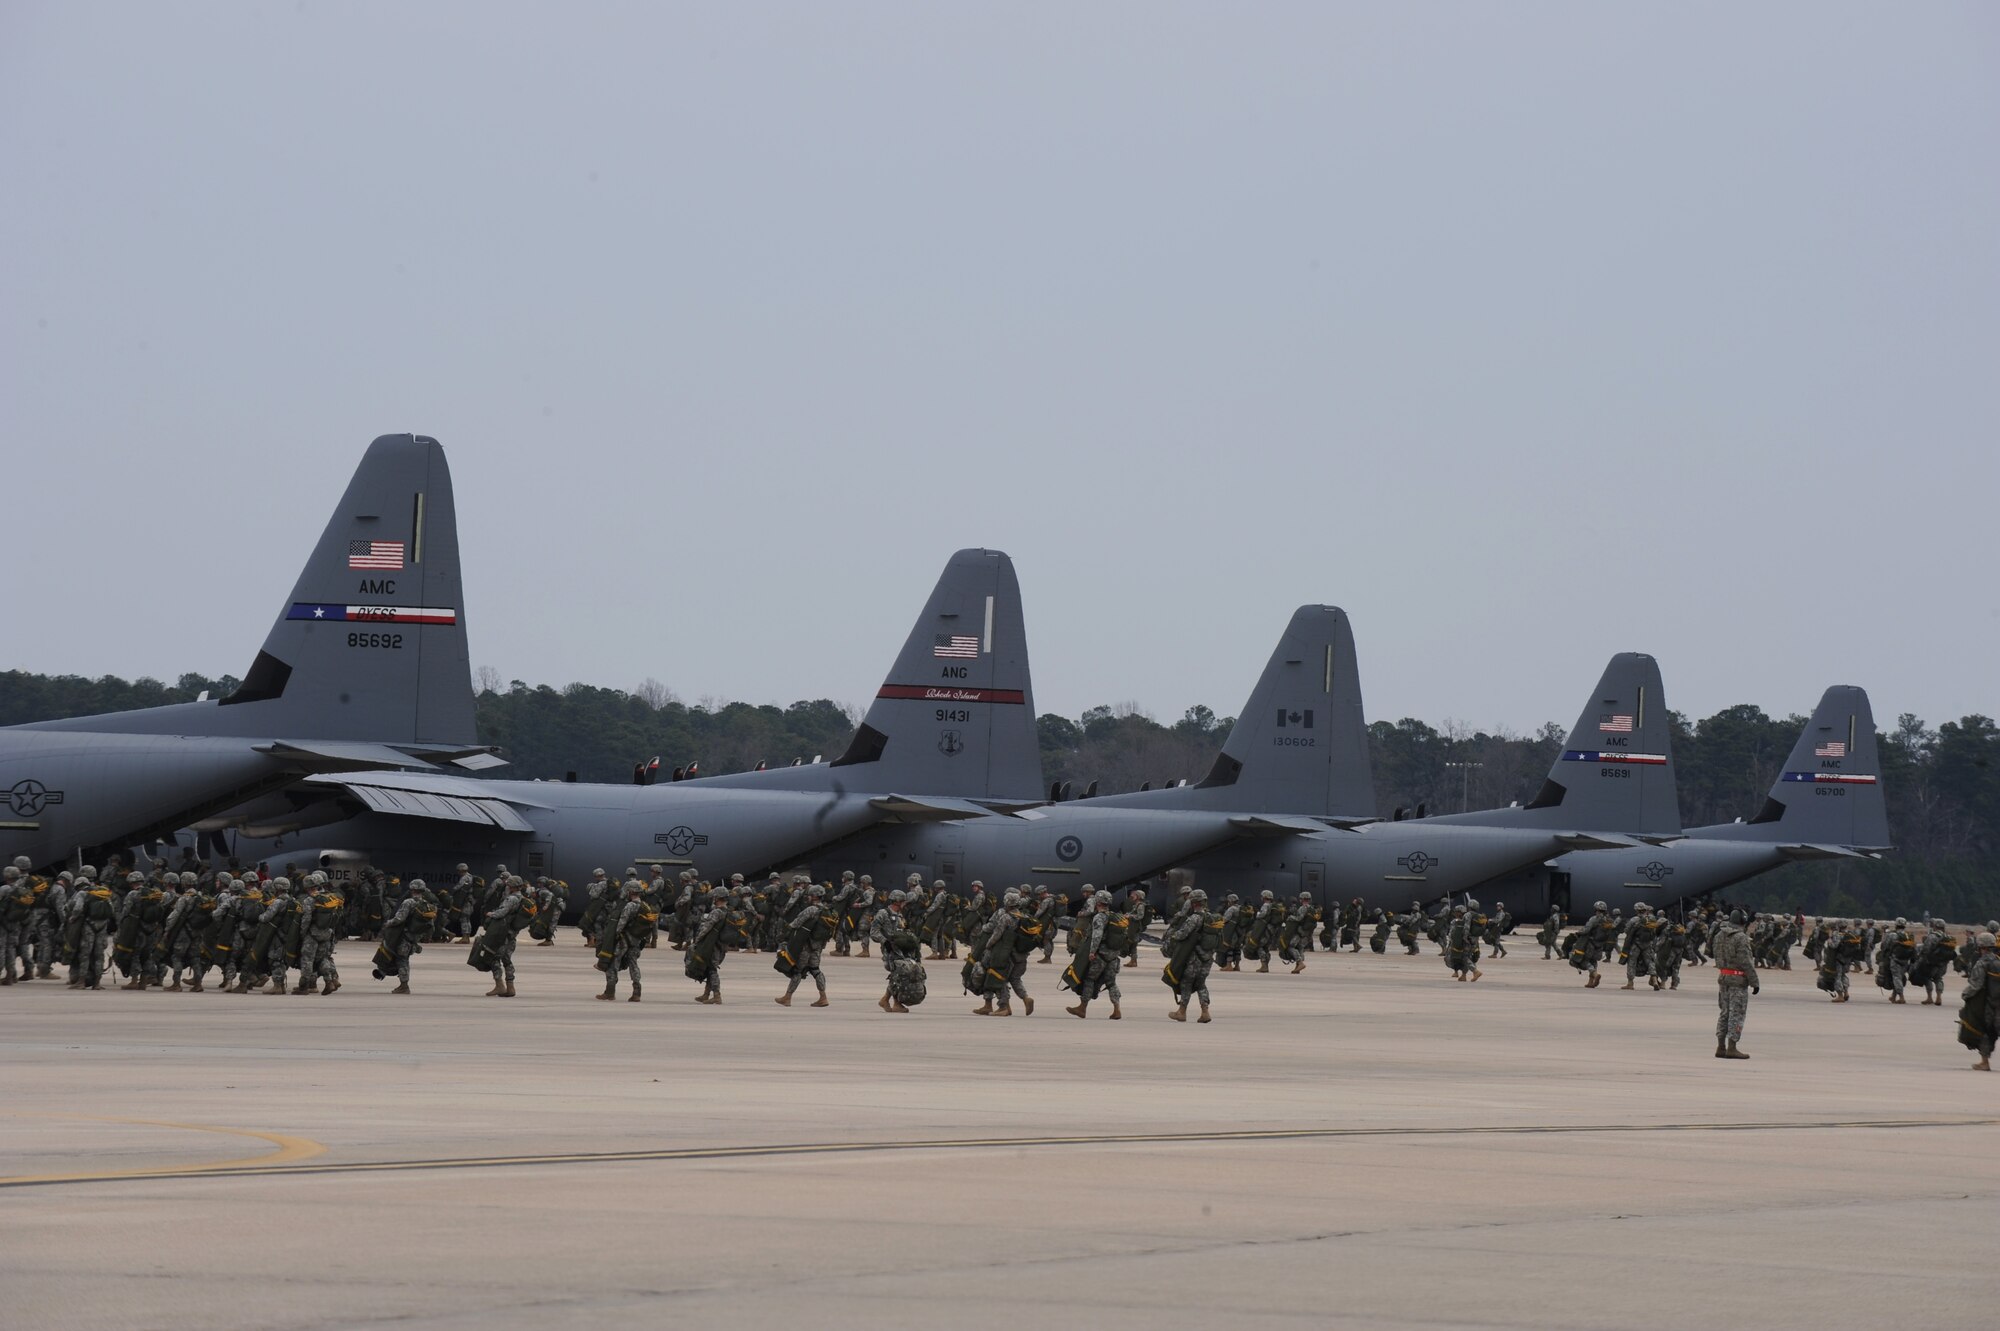 U.S. Army paratroopers board a U.S. Air Force C-130s and Royal Canadian Air Force CC-130s to complete a static line air drop, Feb. 25, 2015, Fort Bragg, N.C. The Joint Operational Access Exercise (JOAX) 13-02 is a combined exercise to prepare elements of the 82nd Airborne Division, along with its partners and enablers to respond as part of the Global Response Force (GRF). (U.S. Air Force photo by Senior Airman Jaclyn McDonald/Released)